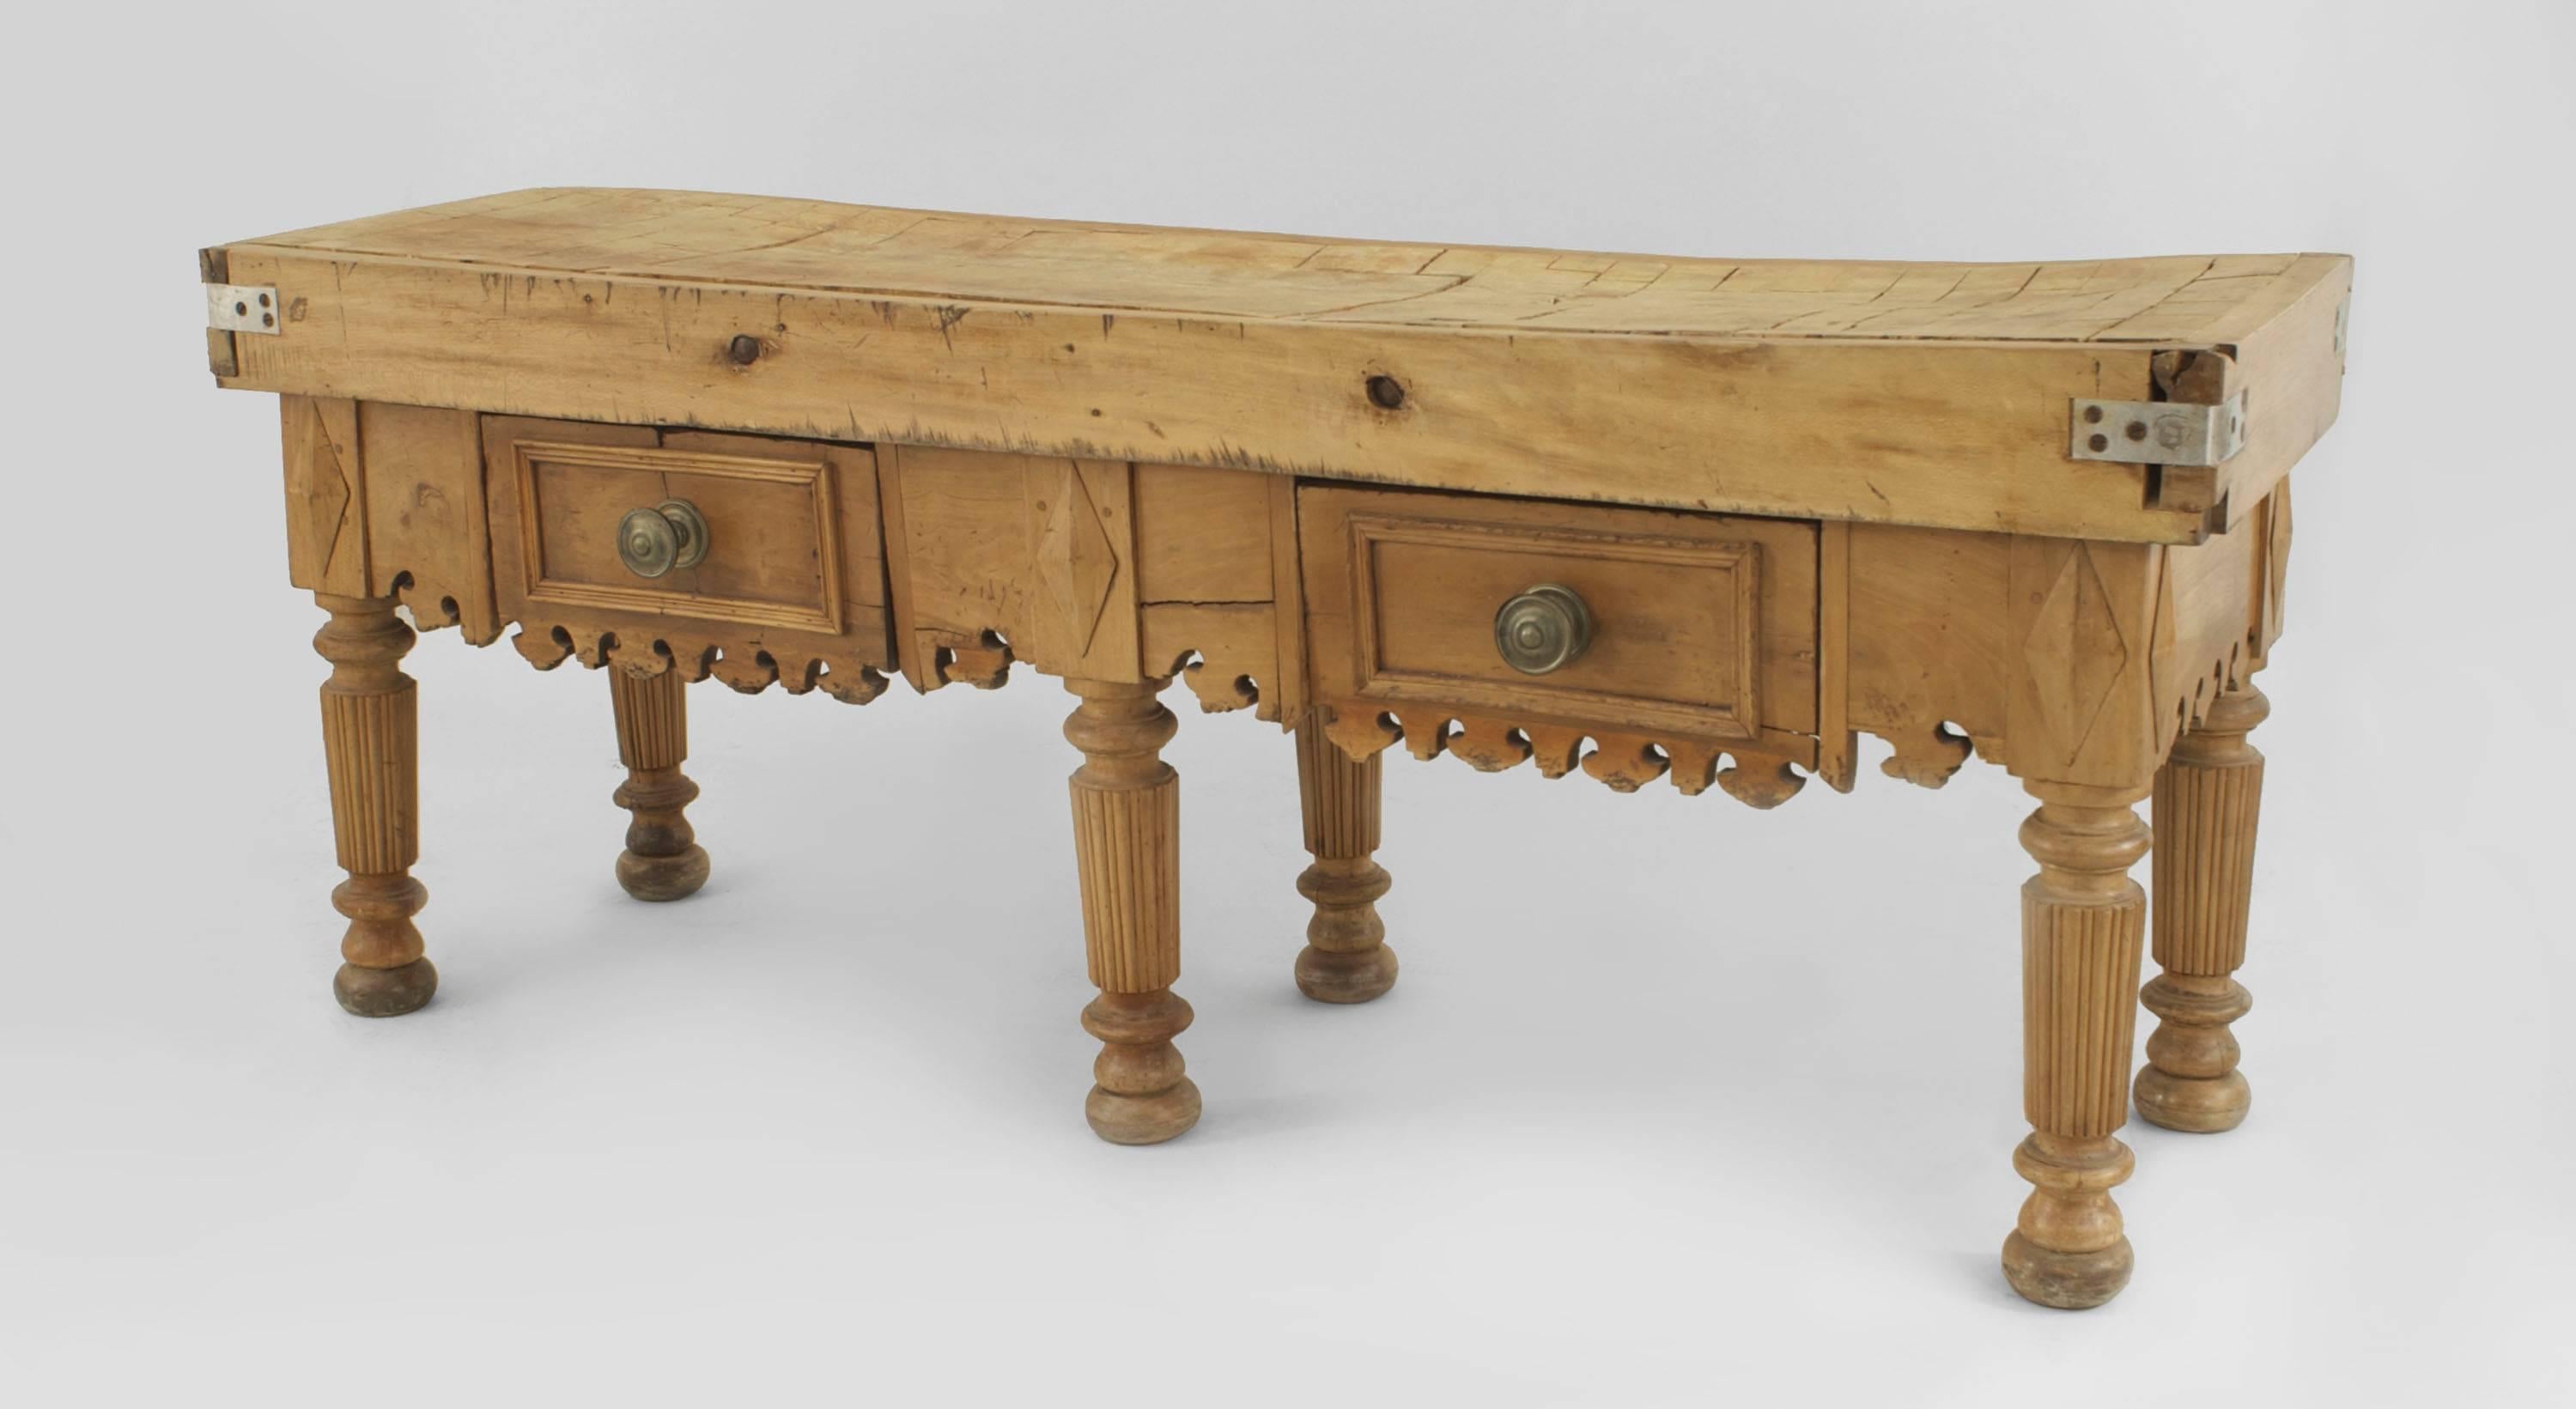 English Country style (19th century) large pine rectangular butcher block table standing on six fluted legs having two drawers with large round brass knobs and a double thick top with a carved apron (some recent modifications added).